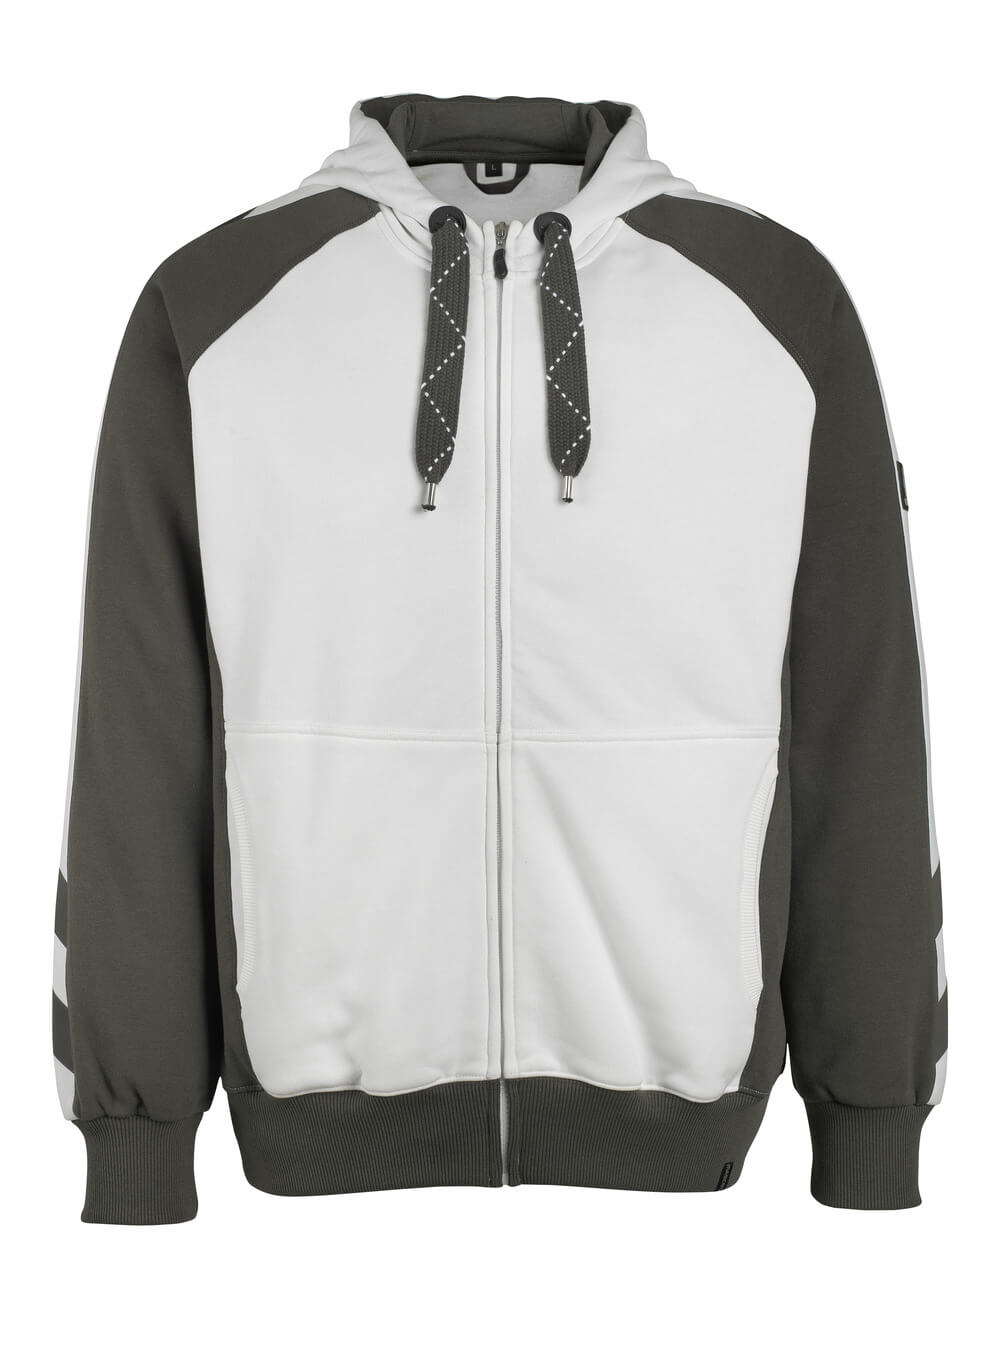 MASCOT®UNIQUE Hoodie with zipper Wiesbaden 50566 - DaltonSafety